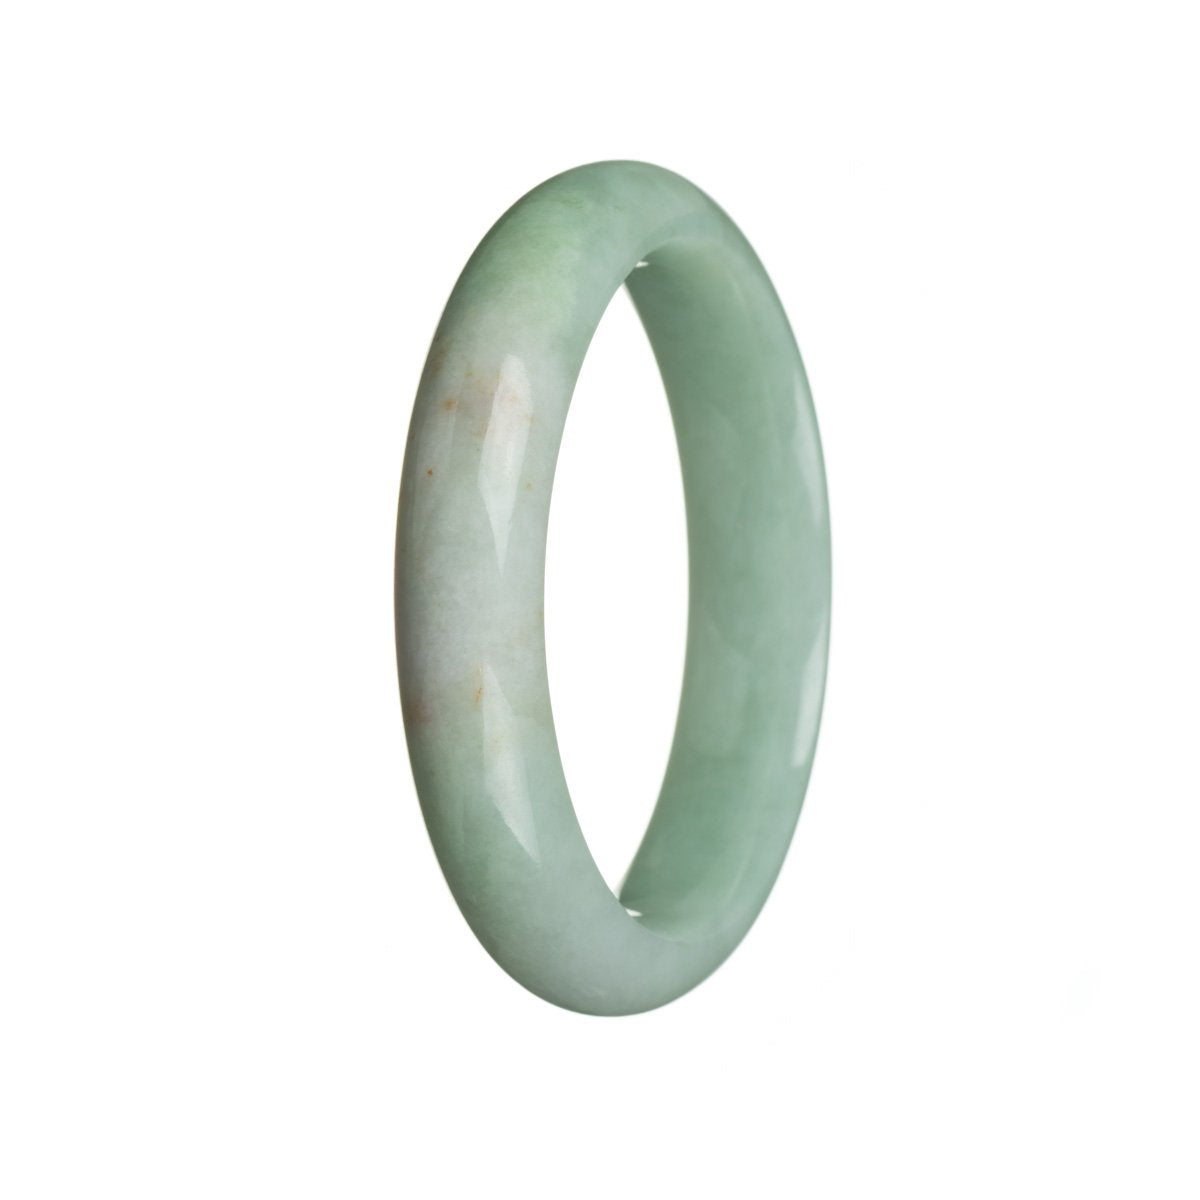 Close-up of a beautiful green jadeite jade bracelet, featuring a semi-round shape and a diameter of 54mm. The bracelet showcases the genuine Grade A quality of the jade, with its vibrant green color and smooth texture. Expertly crafted, this MAYS™ bracelet is a stunning accessory that exudes elegance and sophistication.